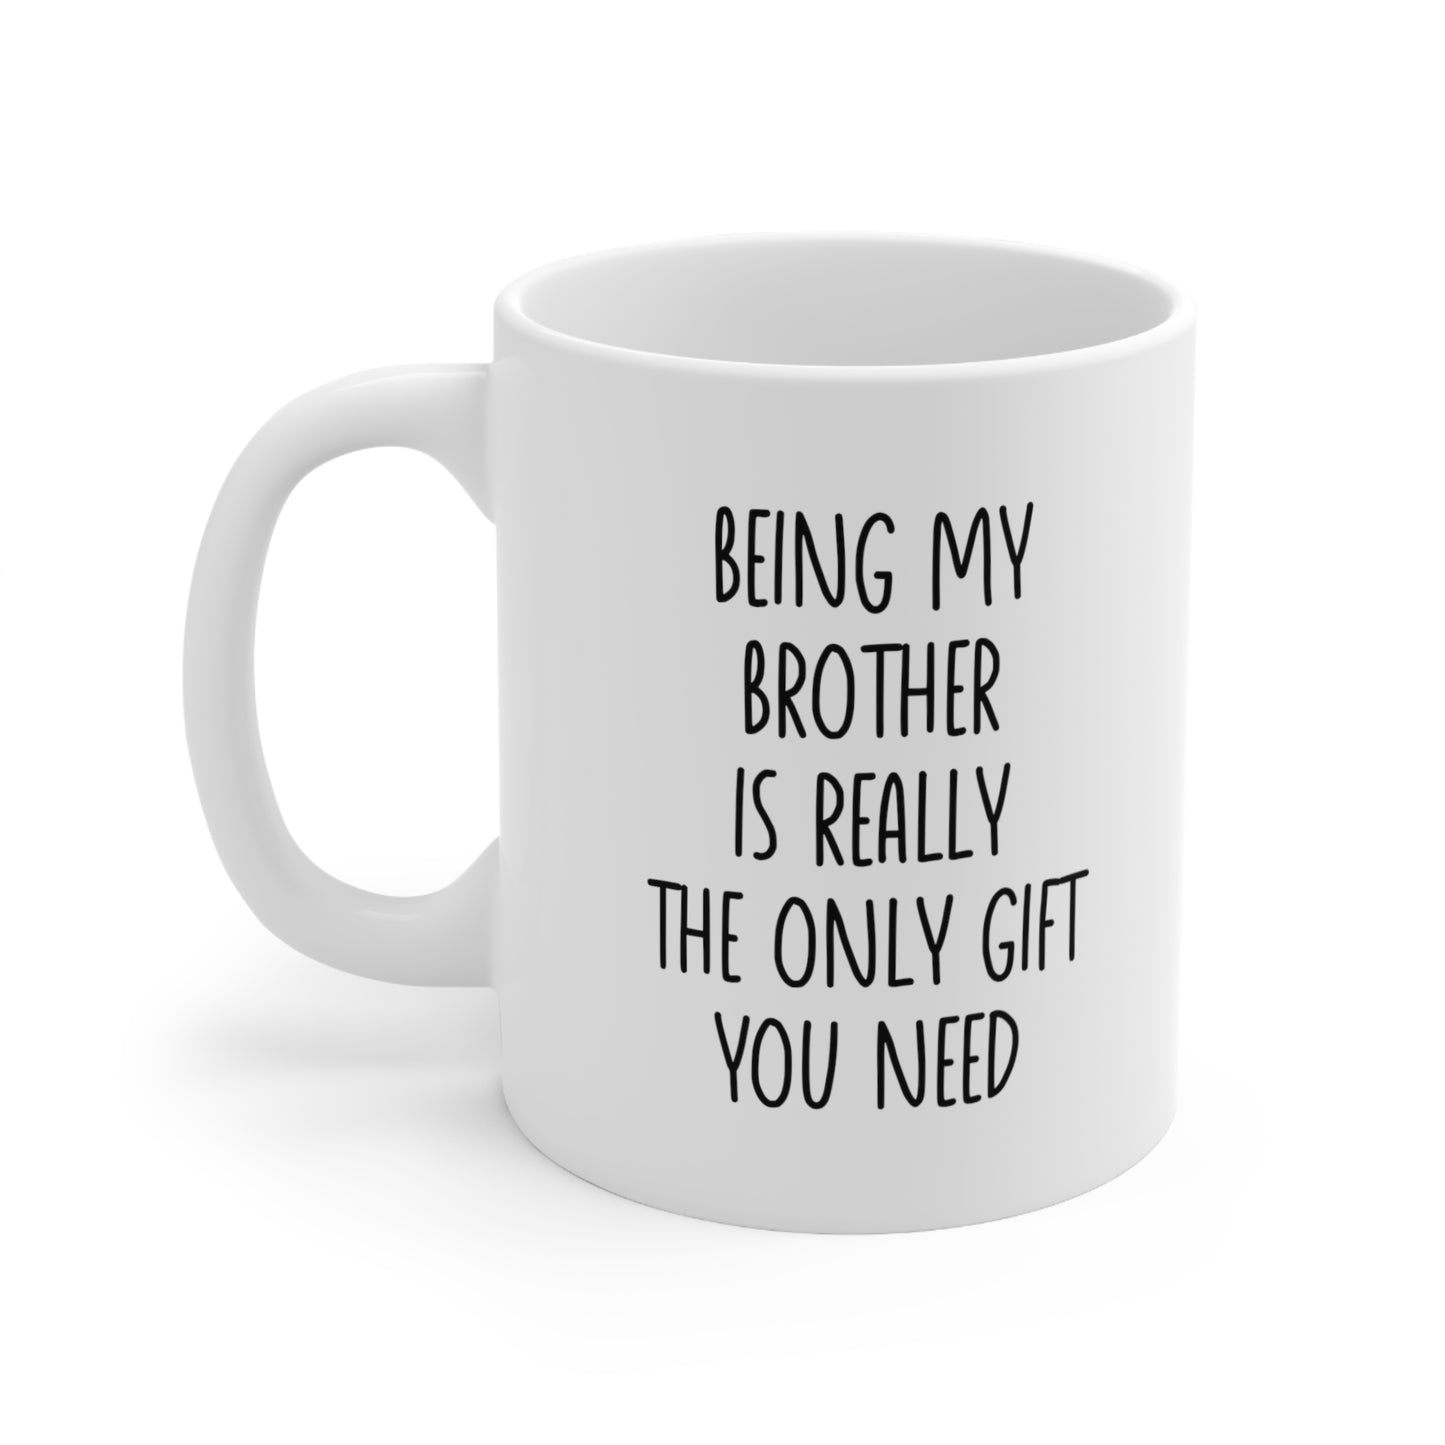 Being My Brother is Really the Only Gift You Need Coffee Mug